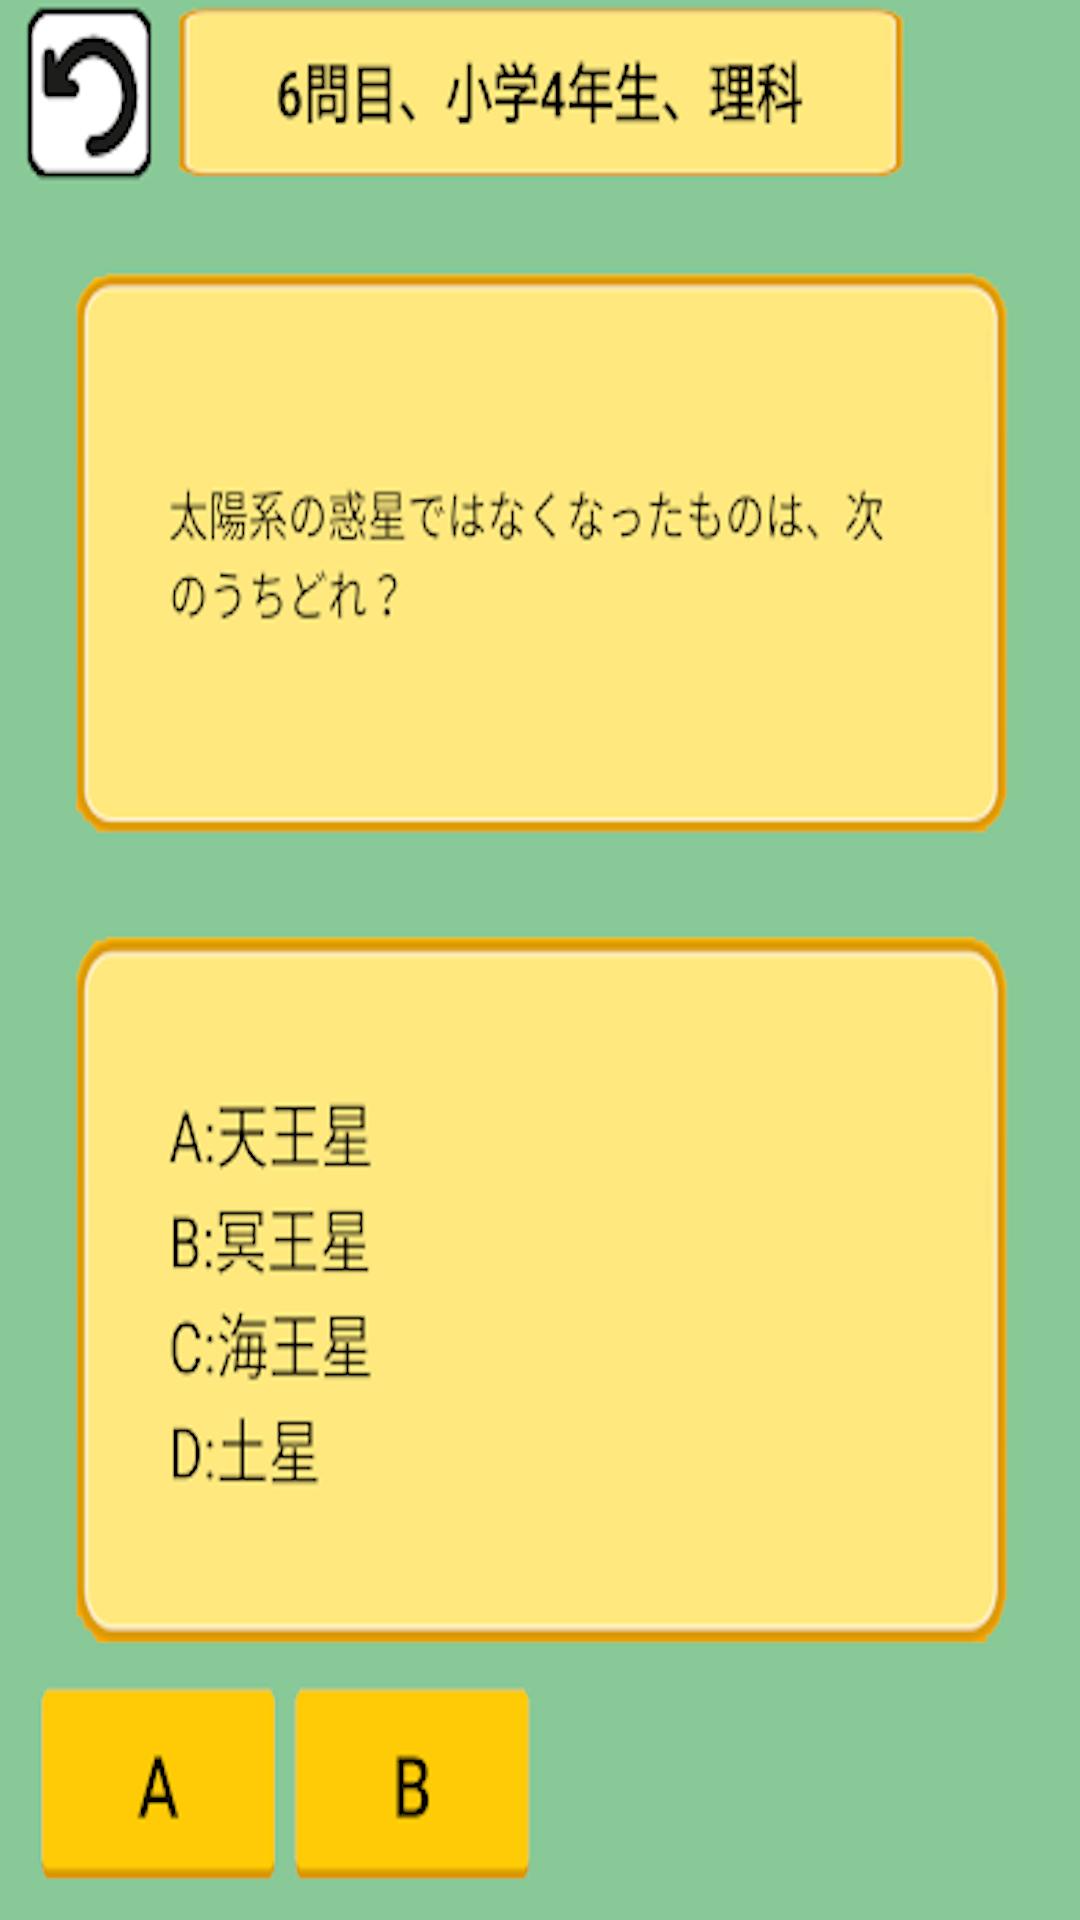 Download 総復習勉強アプリ 算数 国語 漢字 英語 ドリルちびむすび Android On Pc